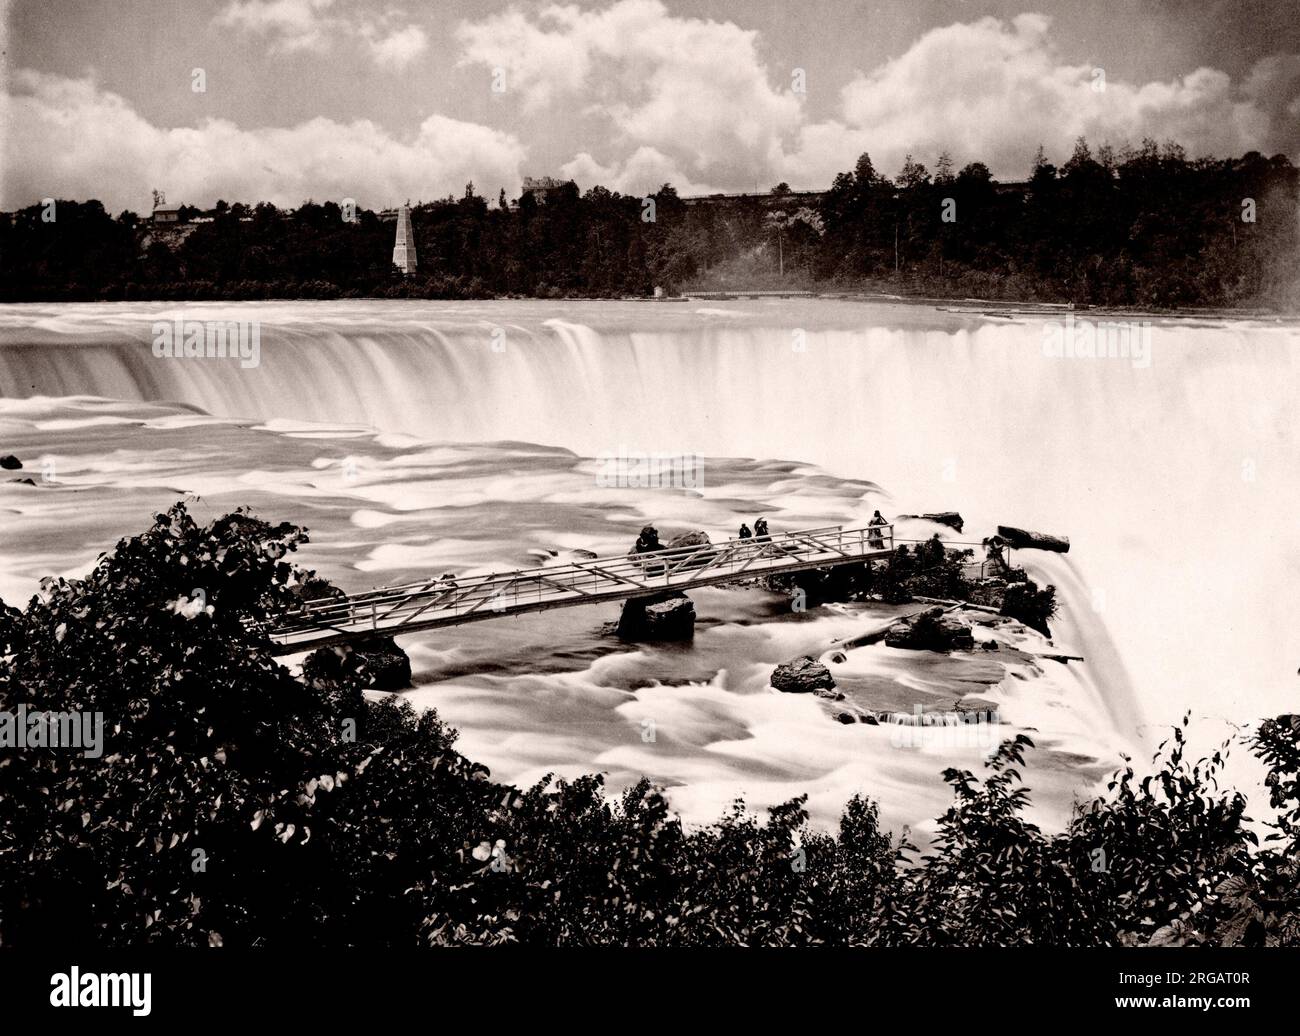 c. 1880s vintage photograph - North America - c. Niagara Falls,  Canada USA border, from the American side Stock Photo